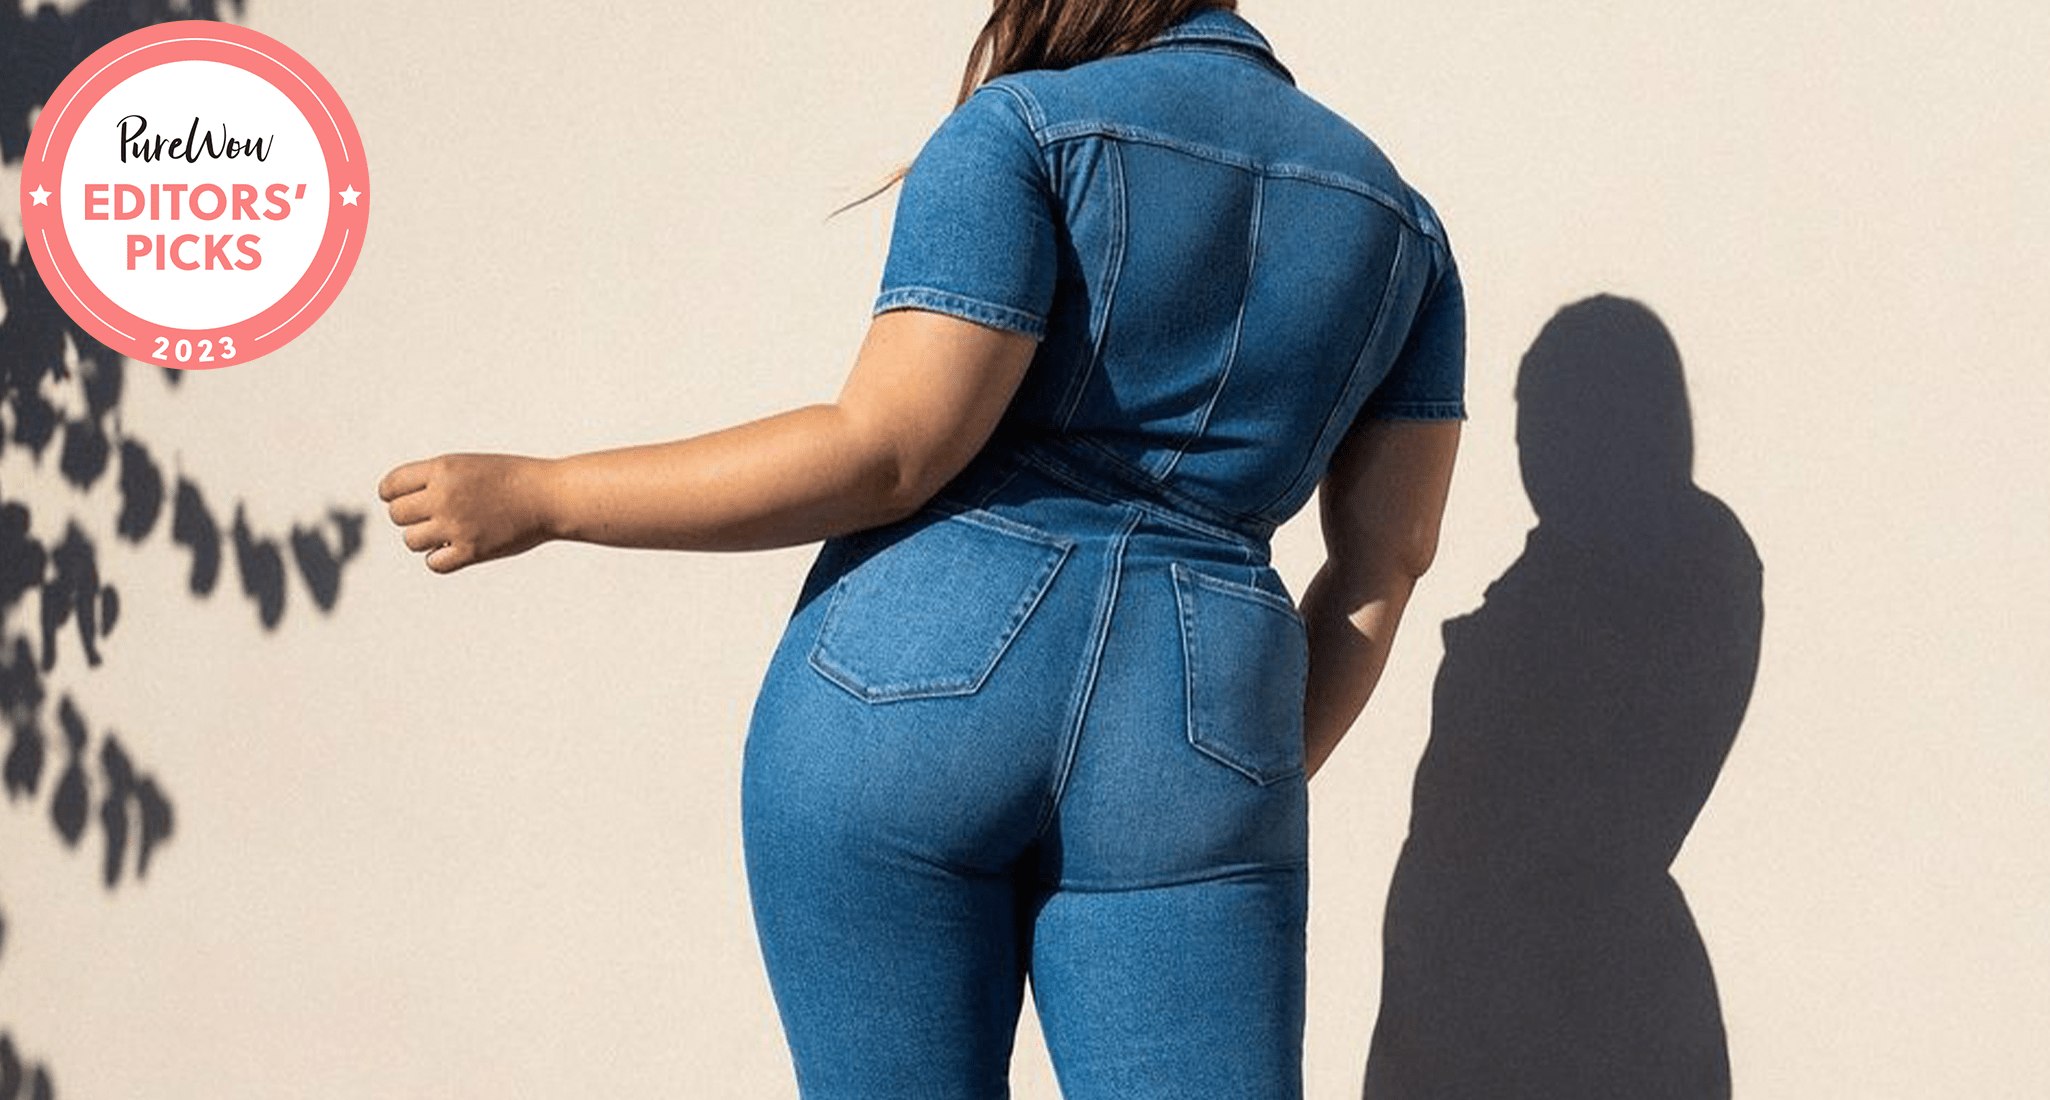 devin hukill recommends phat booty in jeans pic